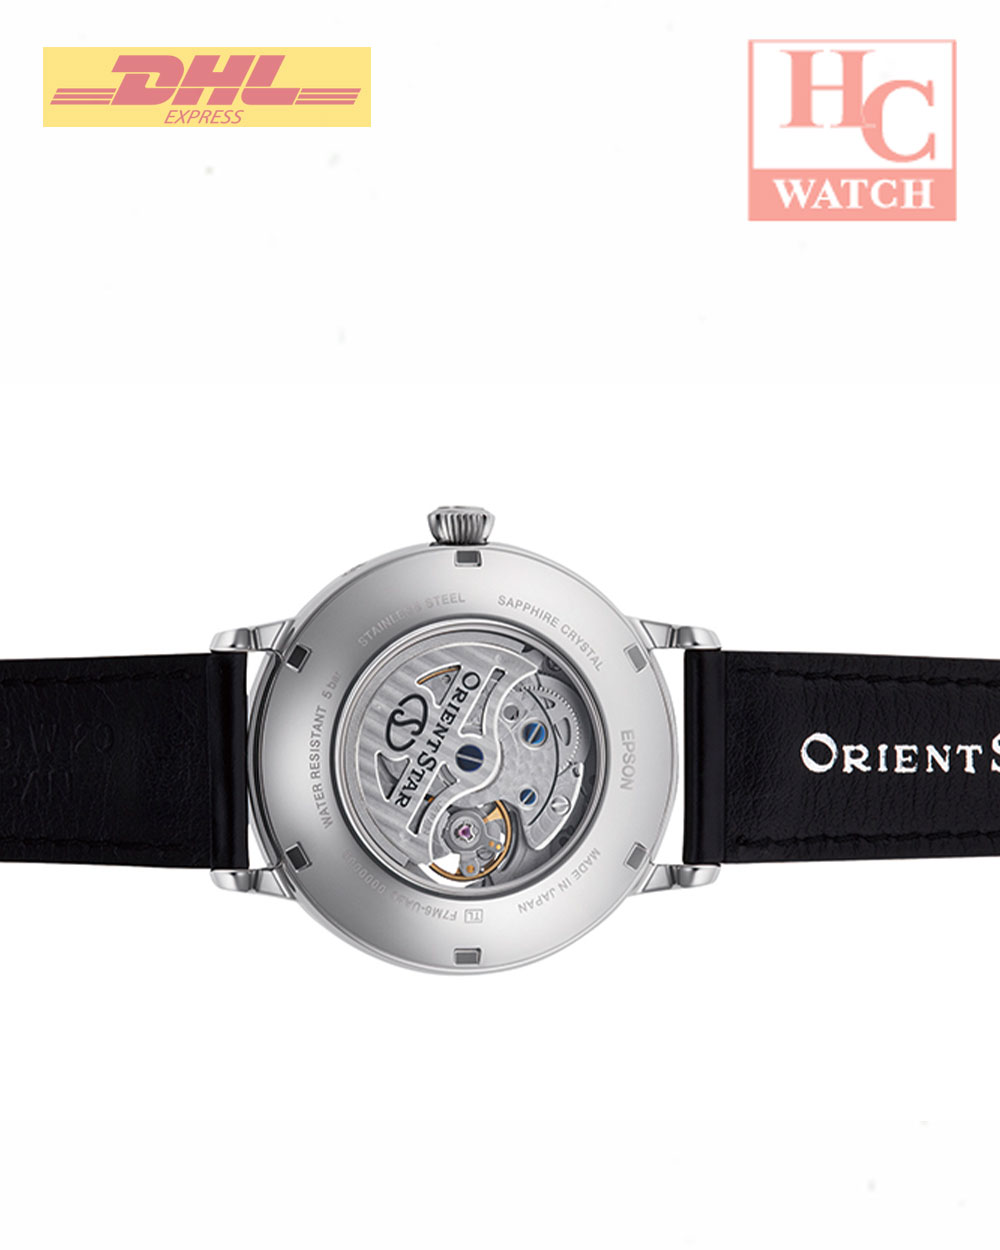 ORIENT STAR RE-AY0107N Moon Phase Classic Cordovan Strap Automatic